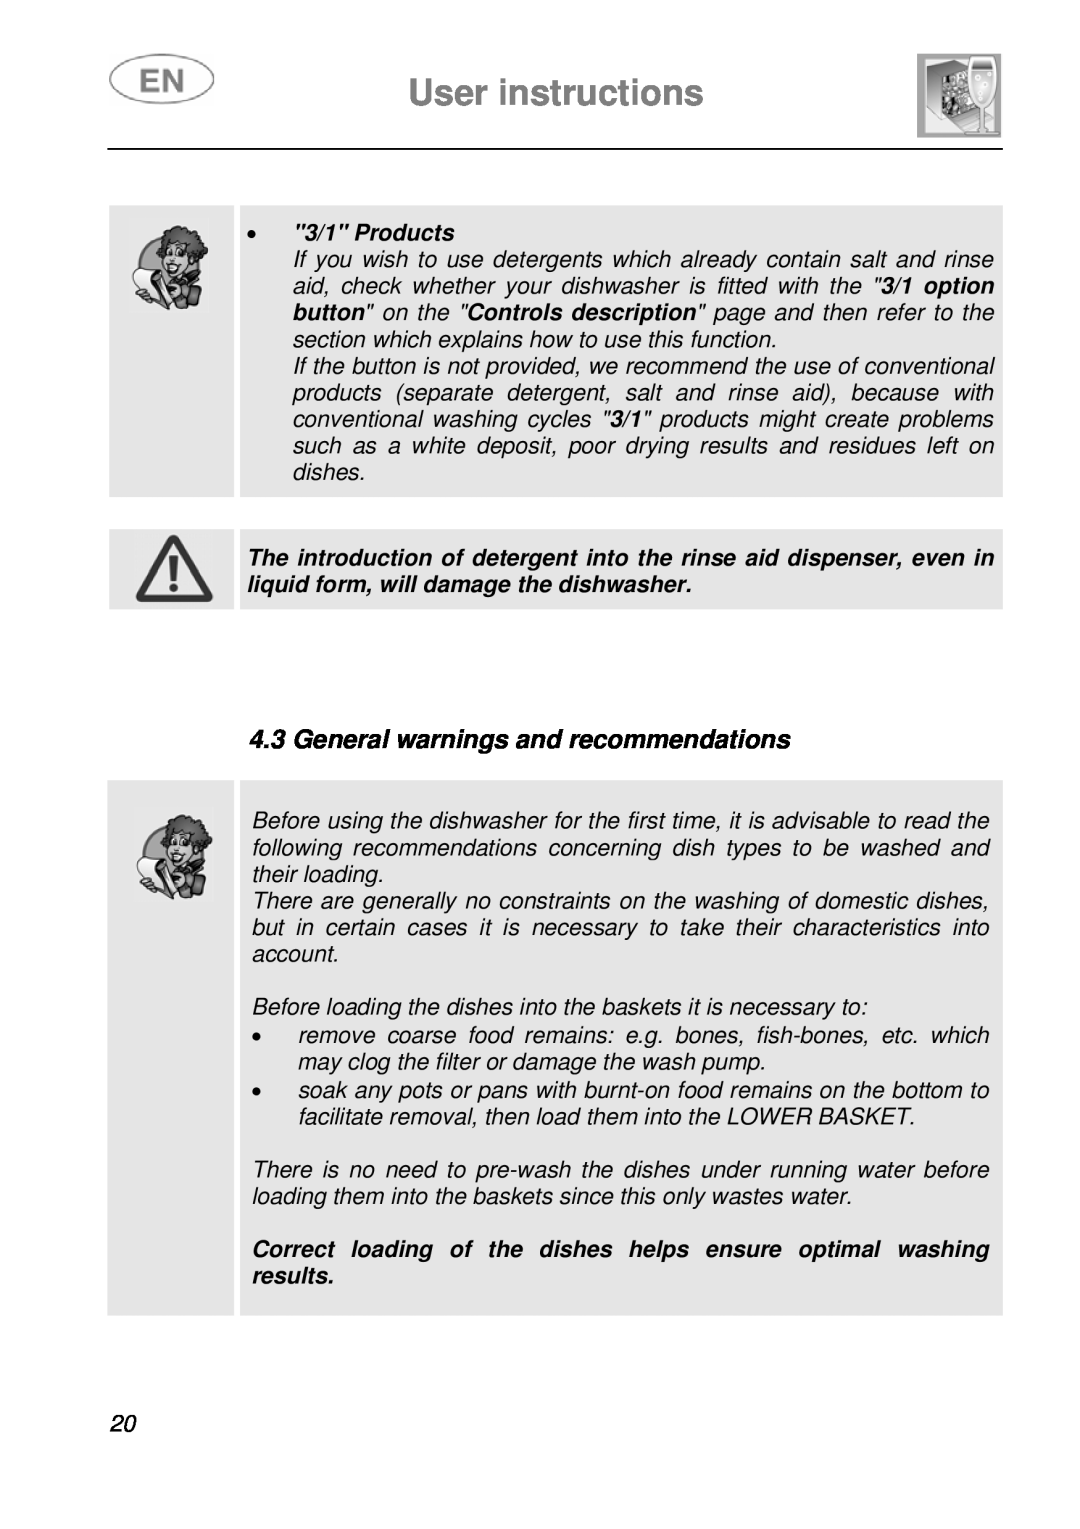 Smeg STA6249, STA6248 instruction manual User instructions, General warnings and recommendations, 3/1 Products 